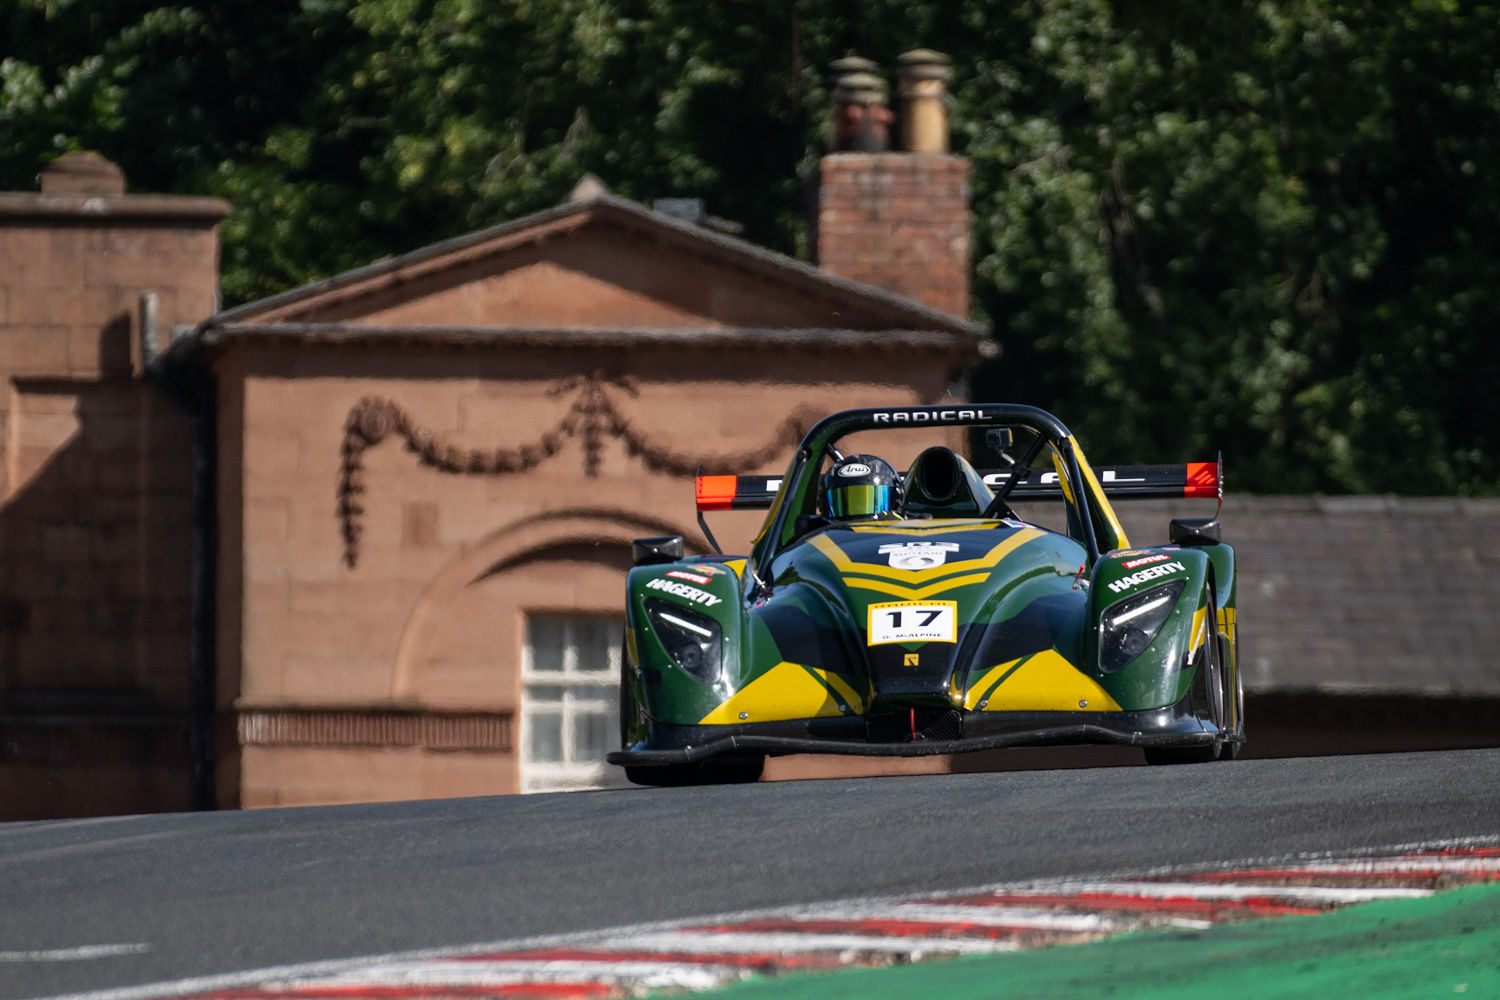 Hagerty Radical Cup Racer Takes to the Track with Sustainable Fuel